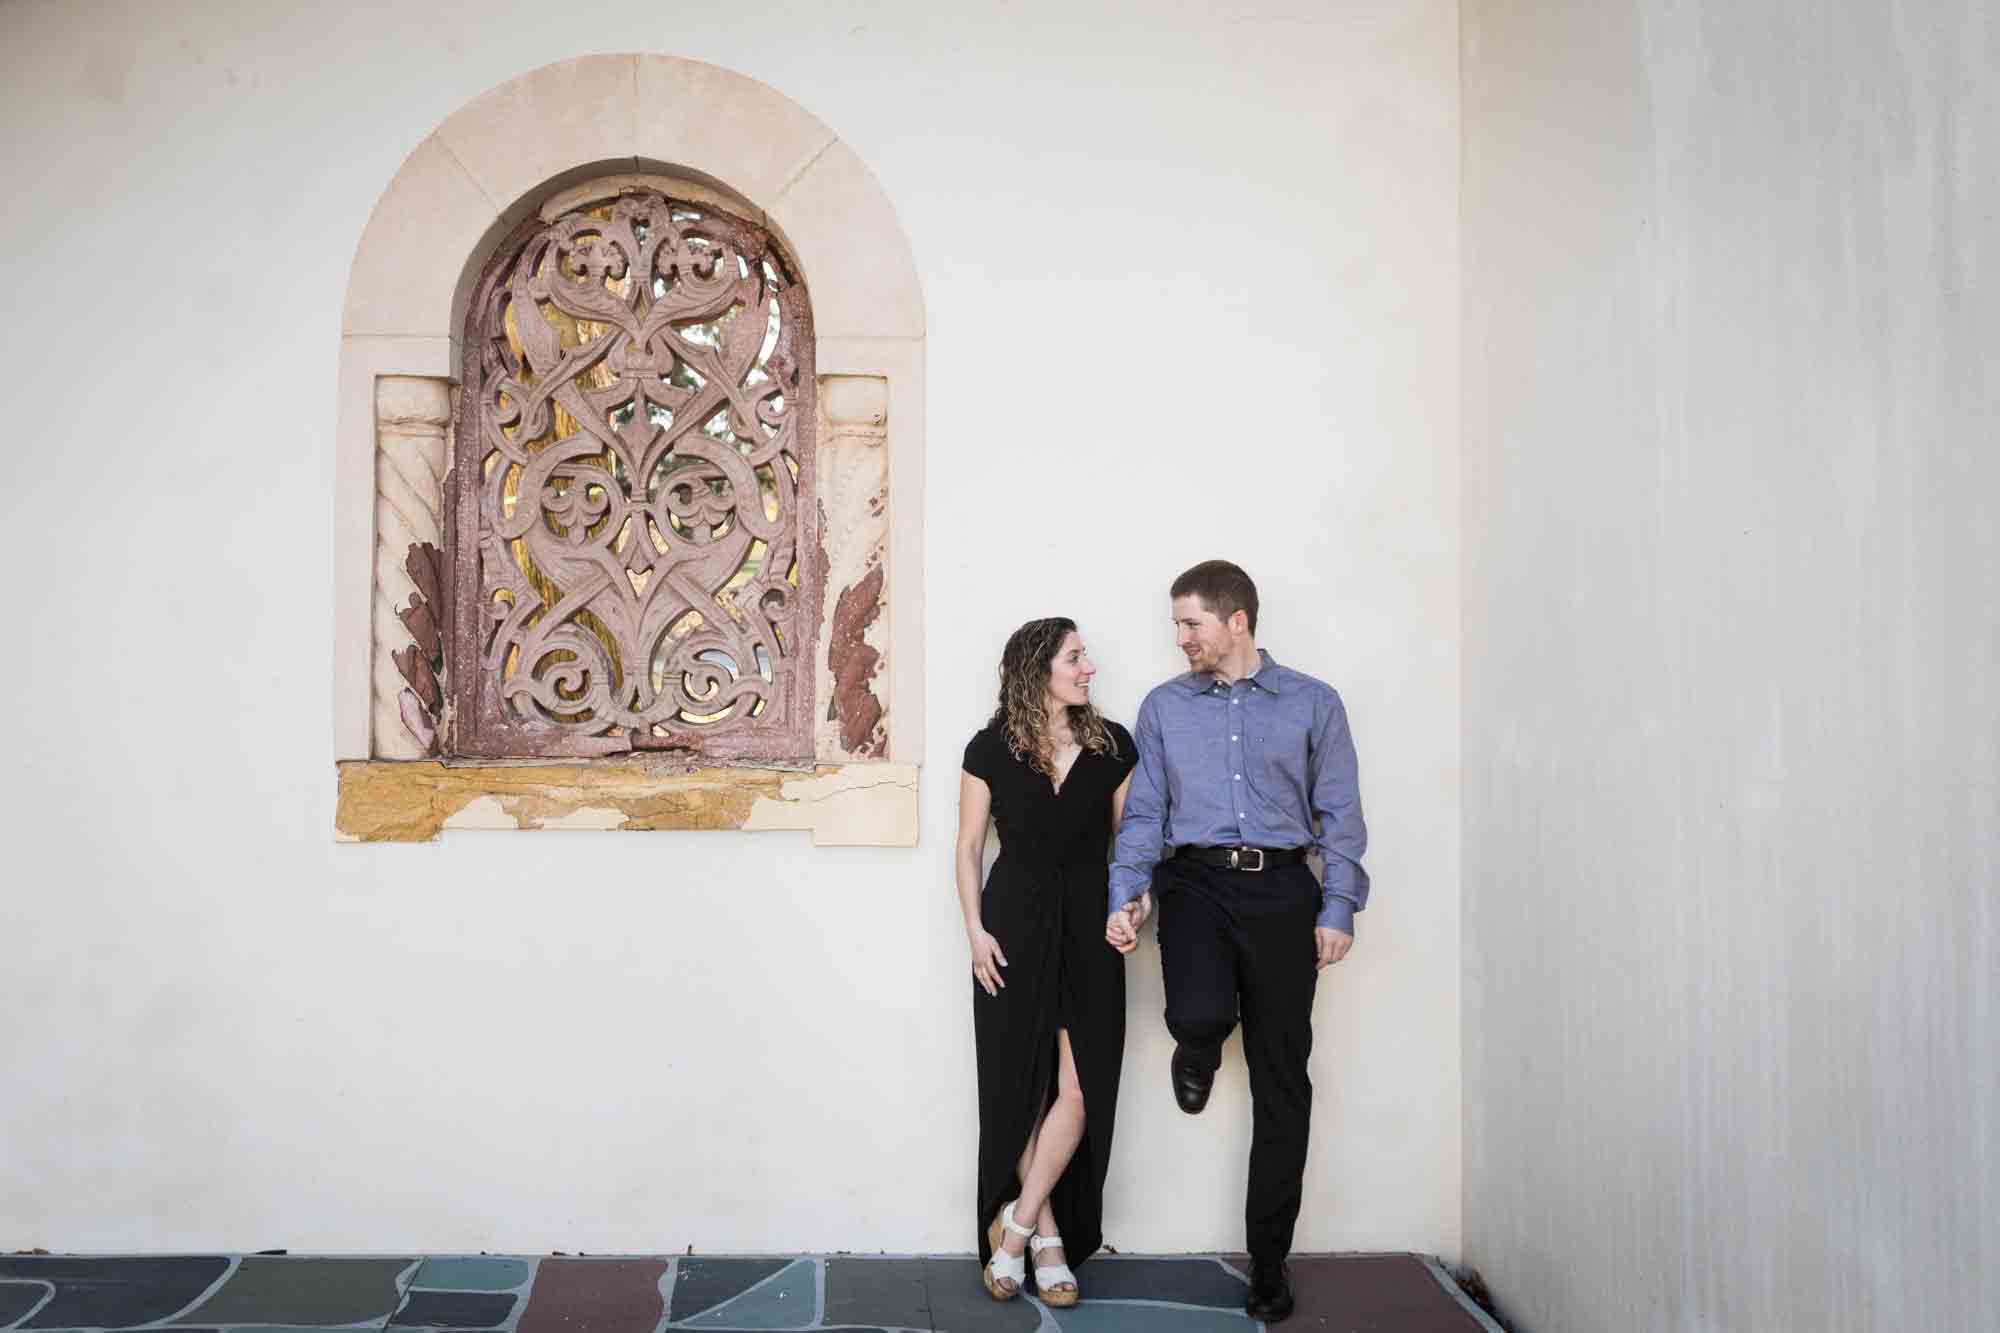 Couple leaning against white wall during a Vanderbilt Museum engagement photo shoot